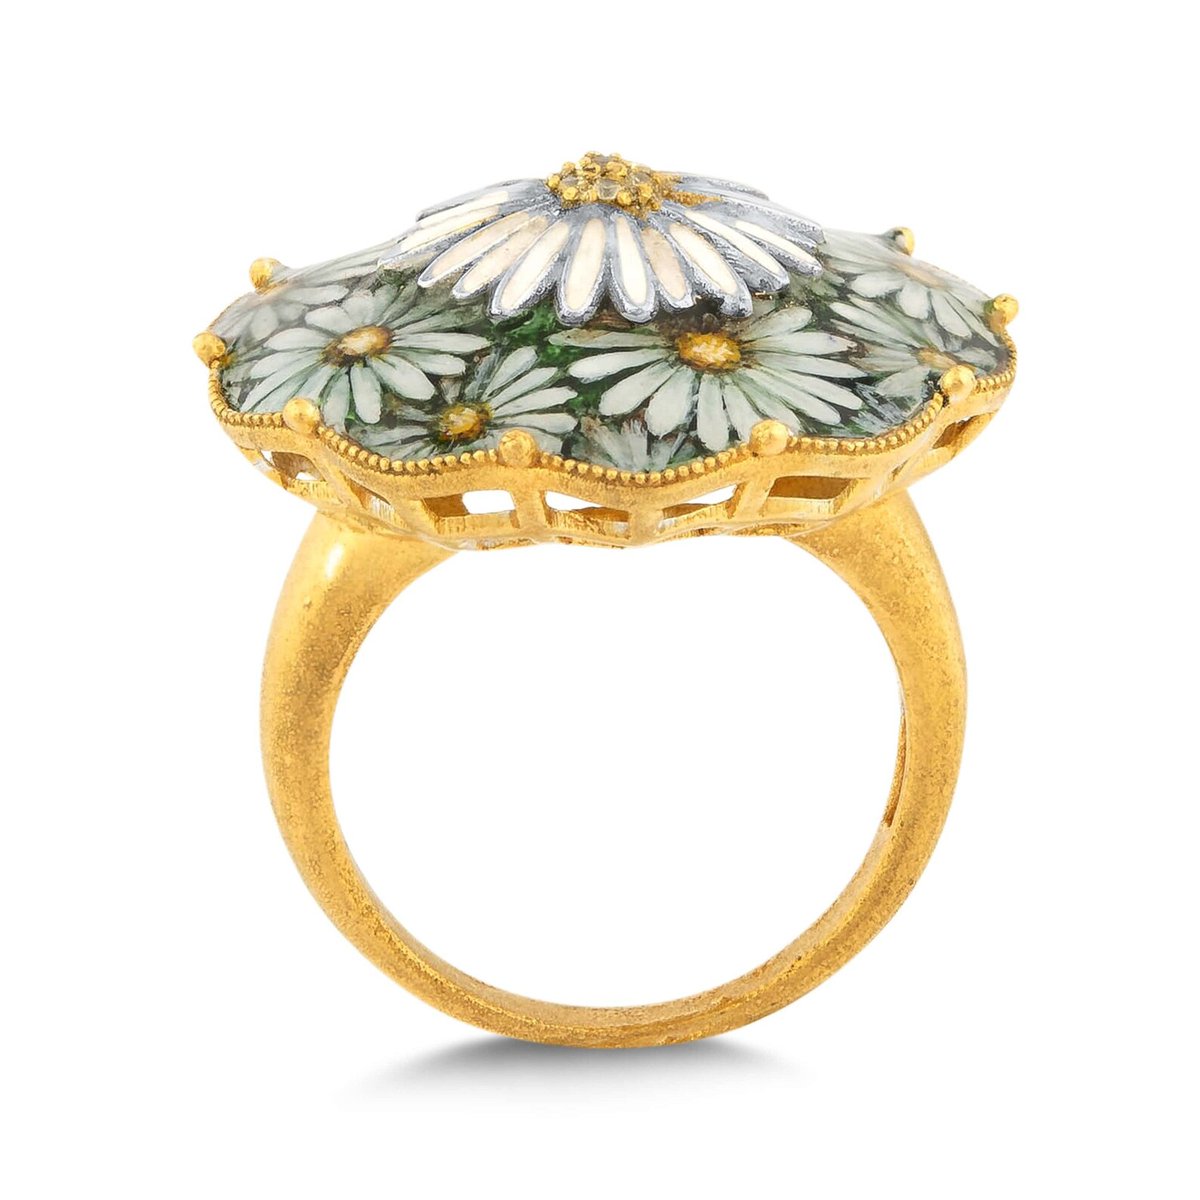 White Sapphire Daisy Women Ring, Hand Painted Floral Signet Ring

Etsy Link : t.ly/Ff06x

#FloralRing #DaisyRing #FlowerRing #ChunkyRing #SignetRing #GemstoneRing #SapphireRing #NatureRing #24KGoldRing #HandmadeRing #UniqueRing #EverydayJewelry #AnniversaryGift